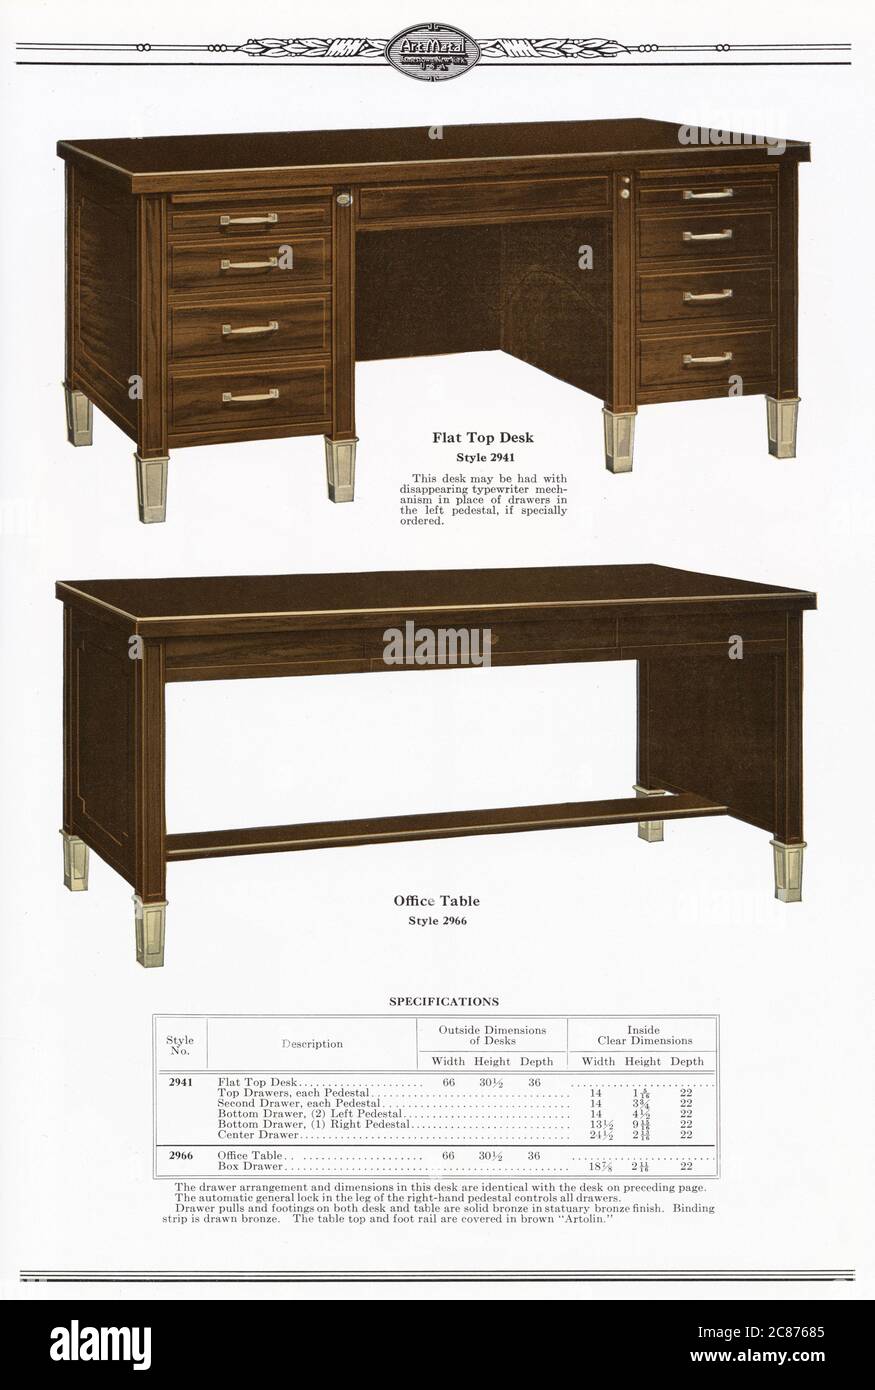 Art Metal Steel Office Equipment, Jamestown, New York, USA - Art Metal furniture for the Executive Office (Flat Top Desk and Office Table), seen here with Mahogany finish. Stock Photo